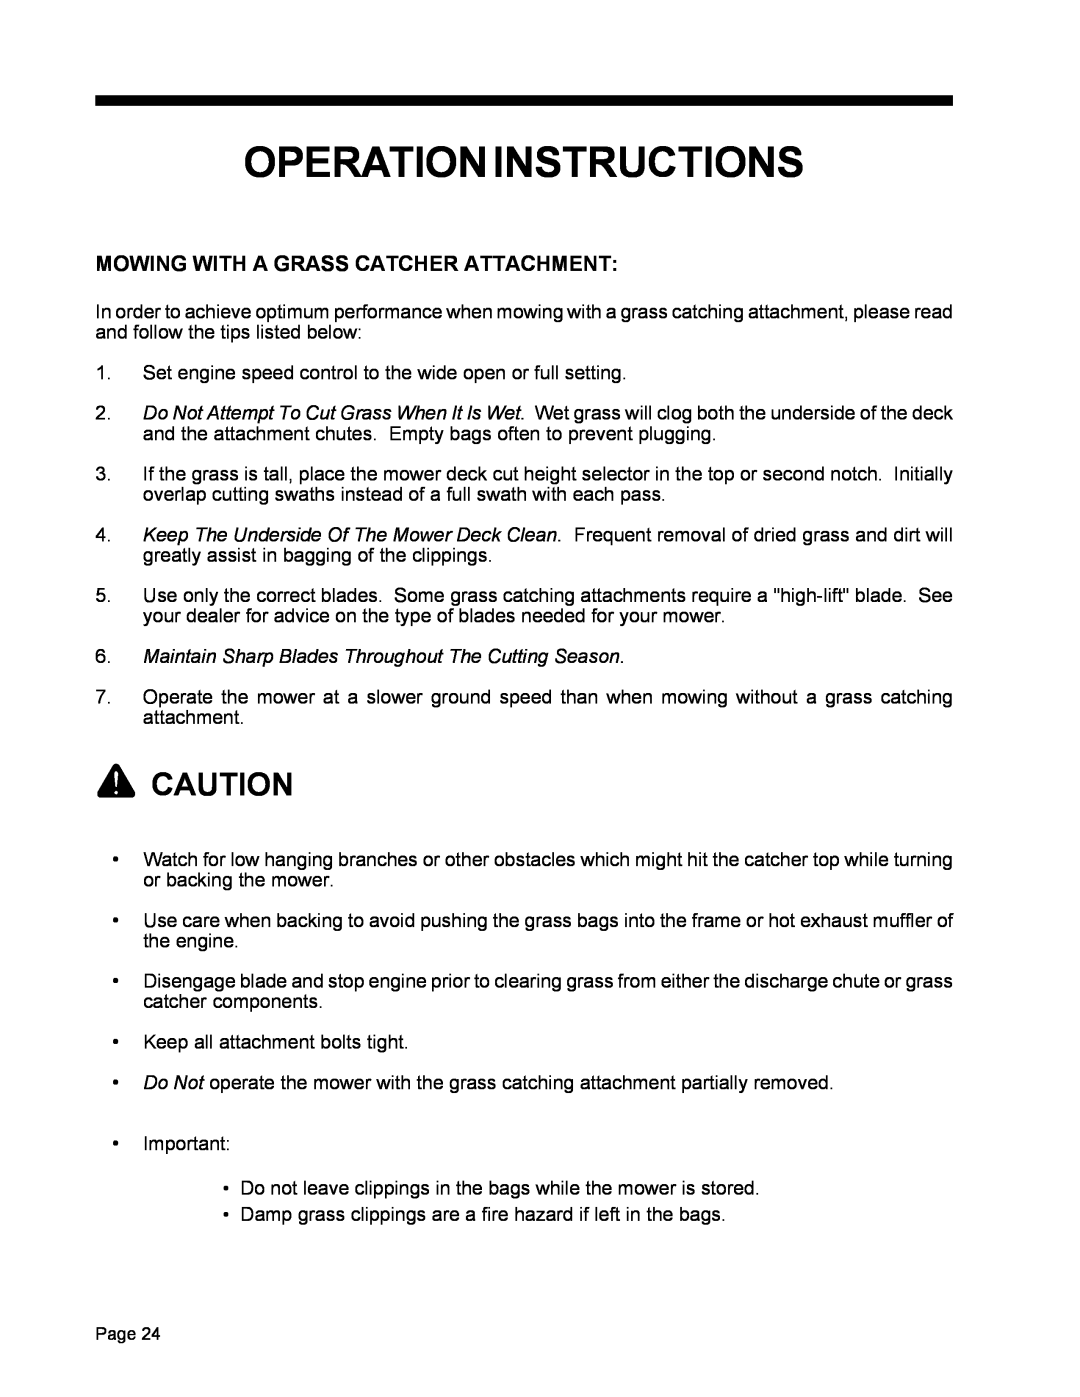 Dixon ZTR 5022, ZTR 5017 manual Operation Instructions, Mowing With A Grass Catcher Attachment 